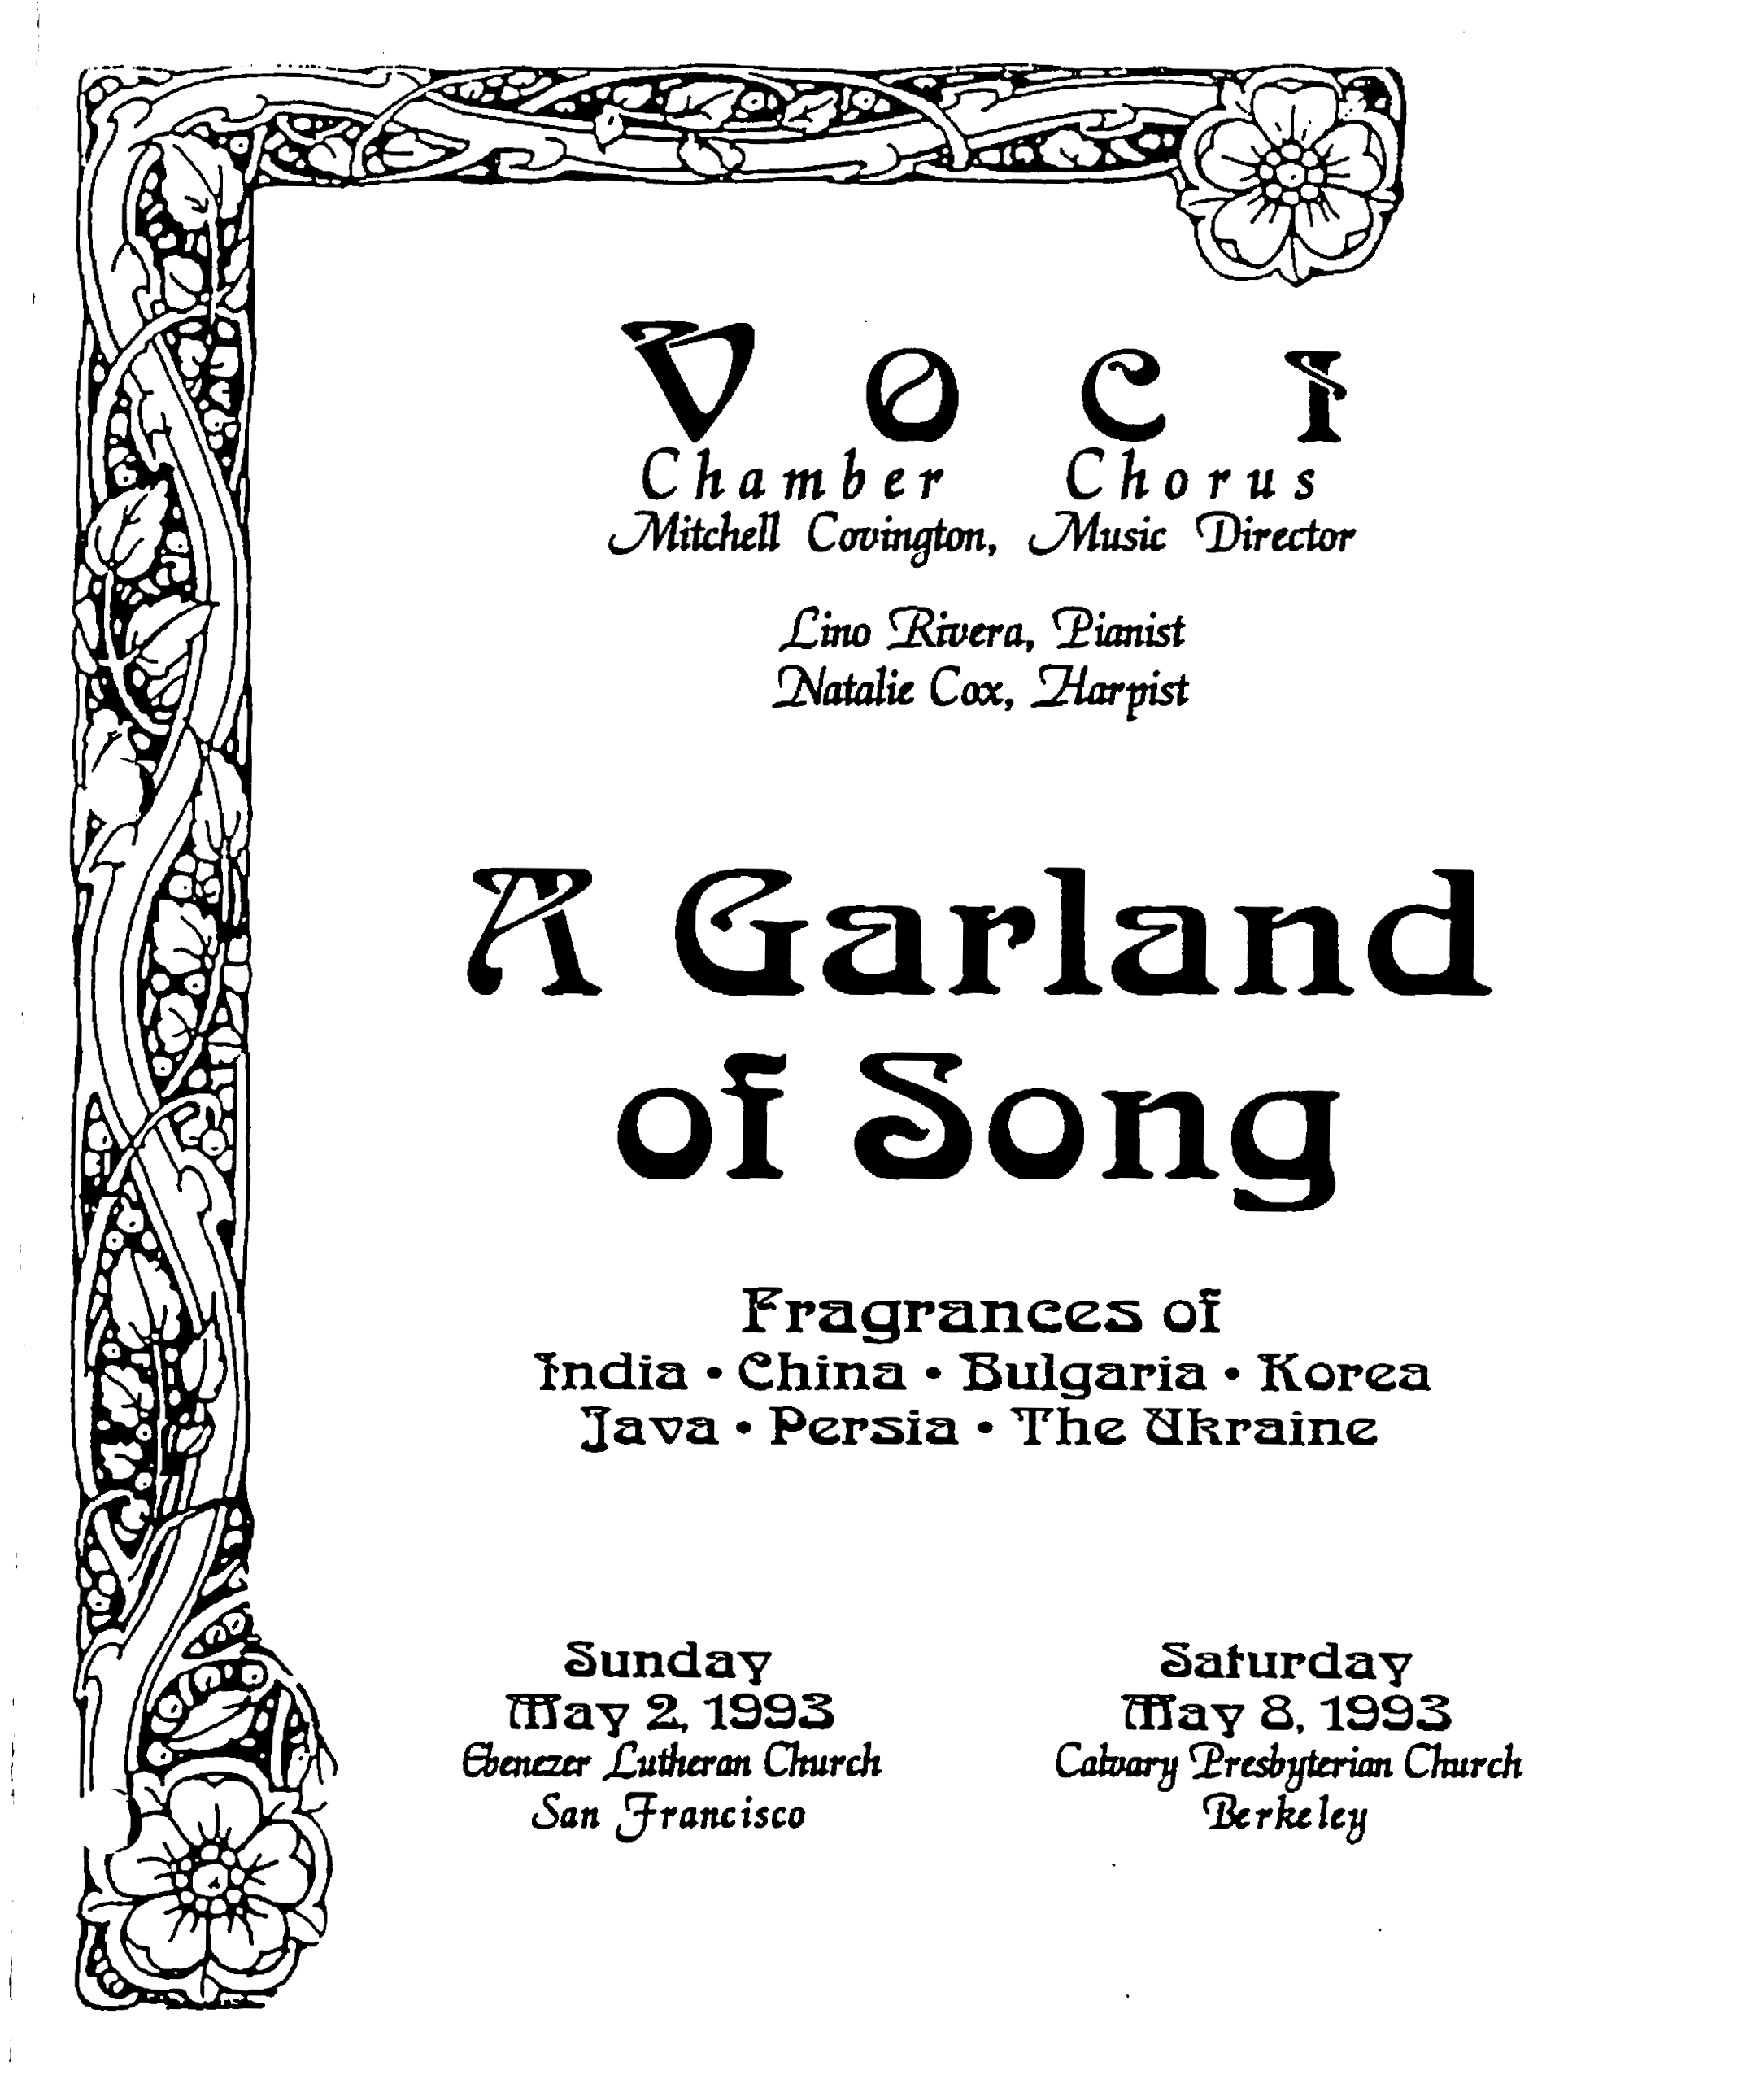 Poster for A Garland of Song